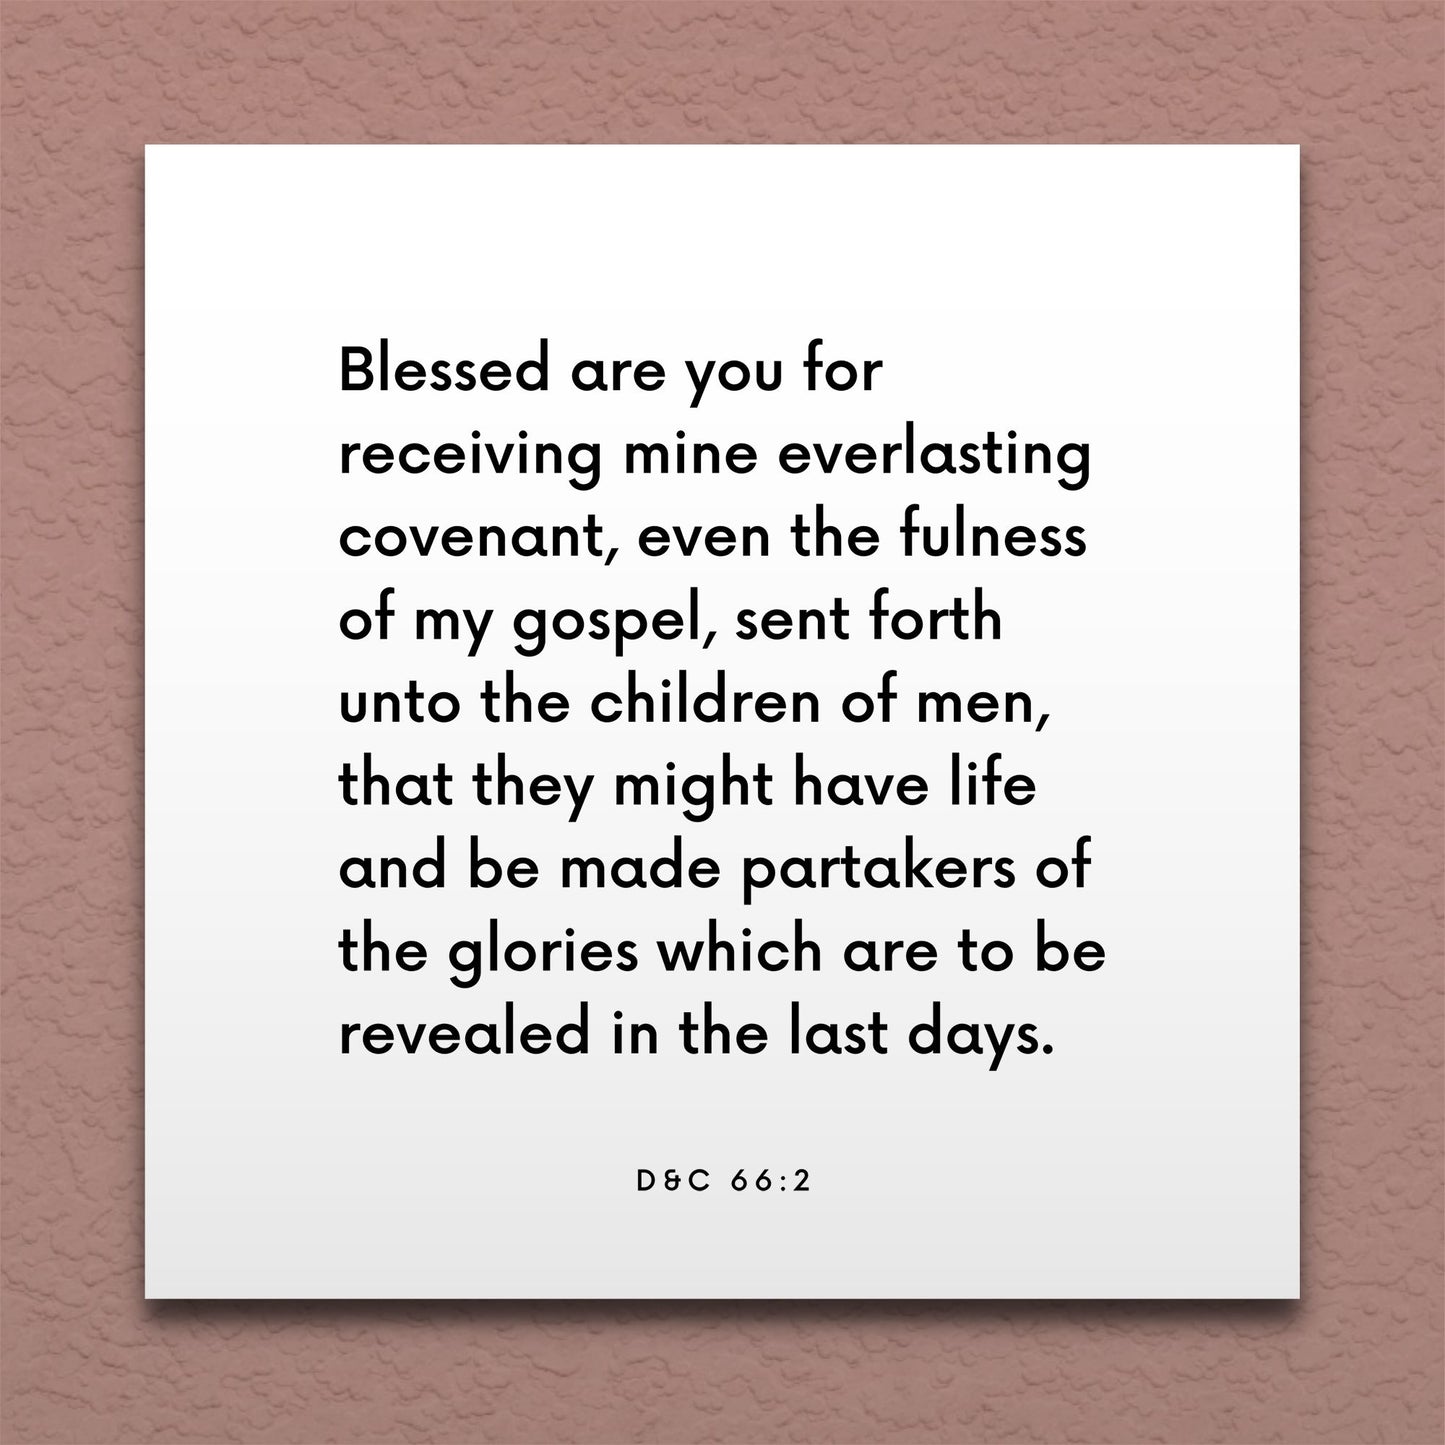 Wall-mounted scripture tile for D&C 66:2 - "Blessed are you for receiving mine everlasting covenant"